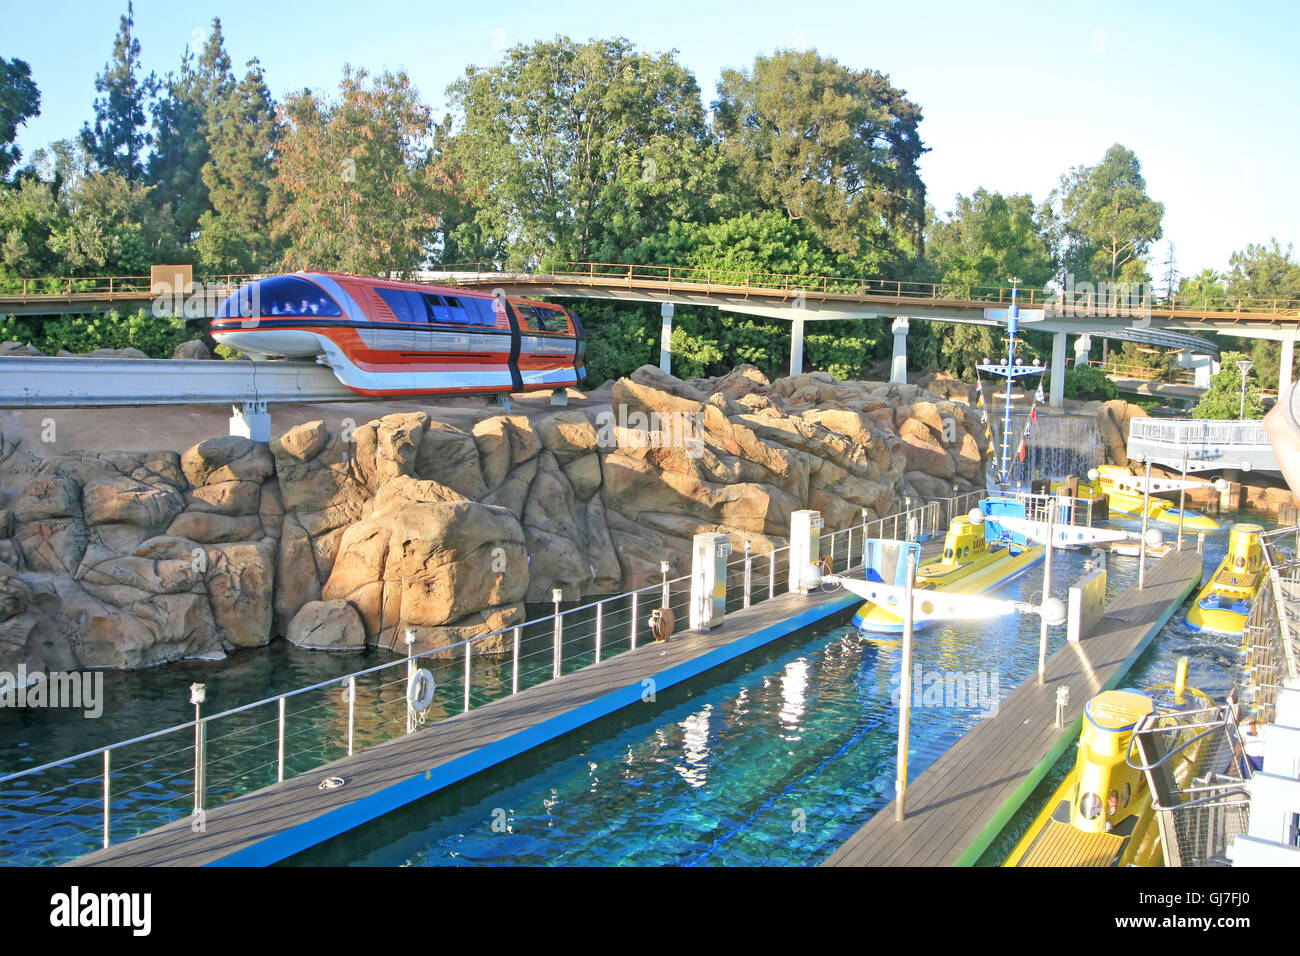 Anaheim, California, USA. September 16th, 2009. The monorail going over the the Finding Nemo Submarine Voyage in Disneyland. Stock Photo